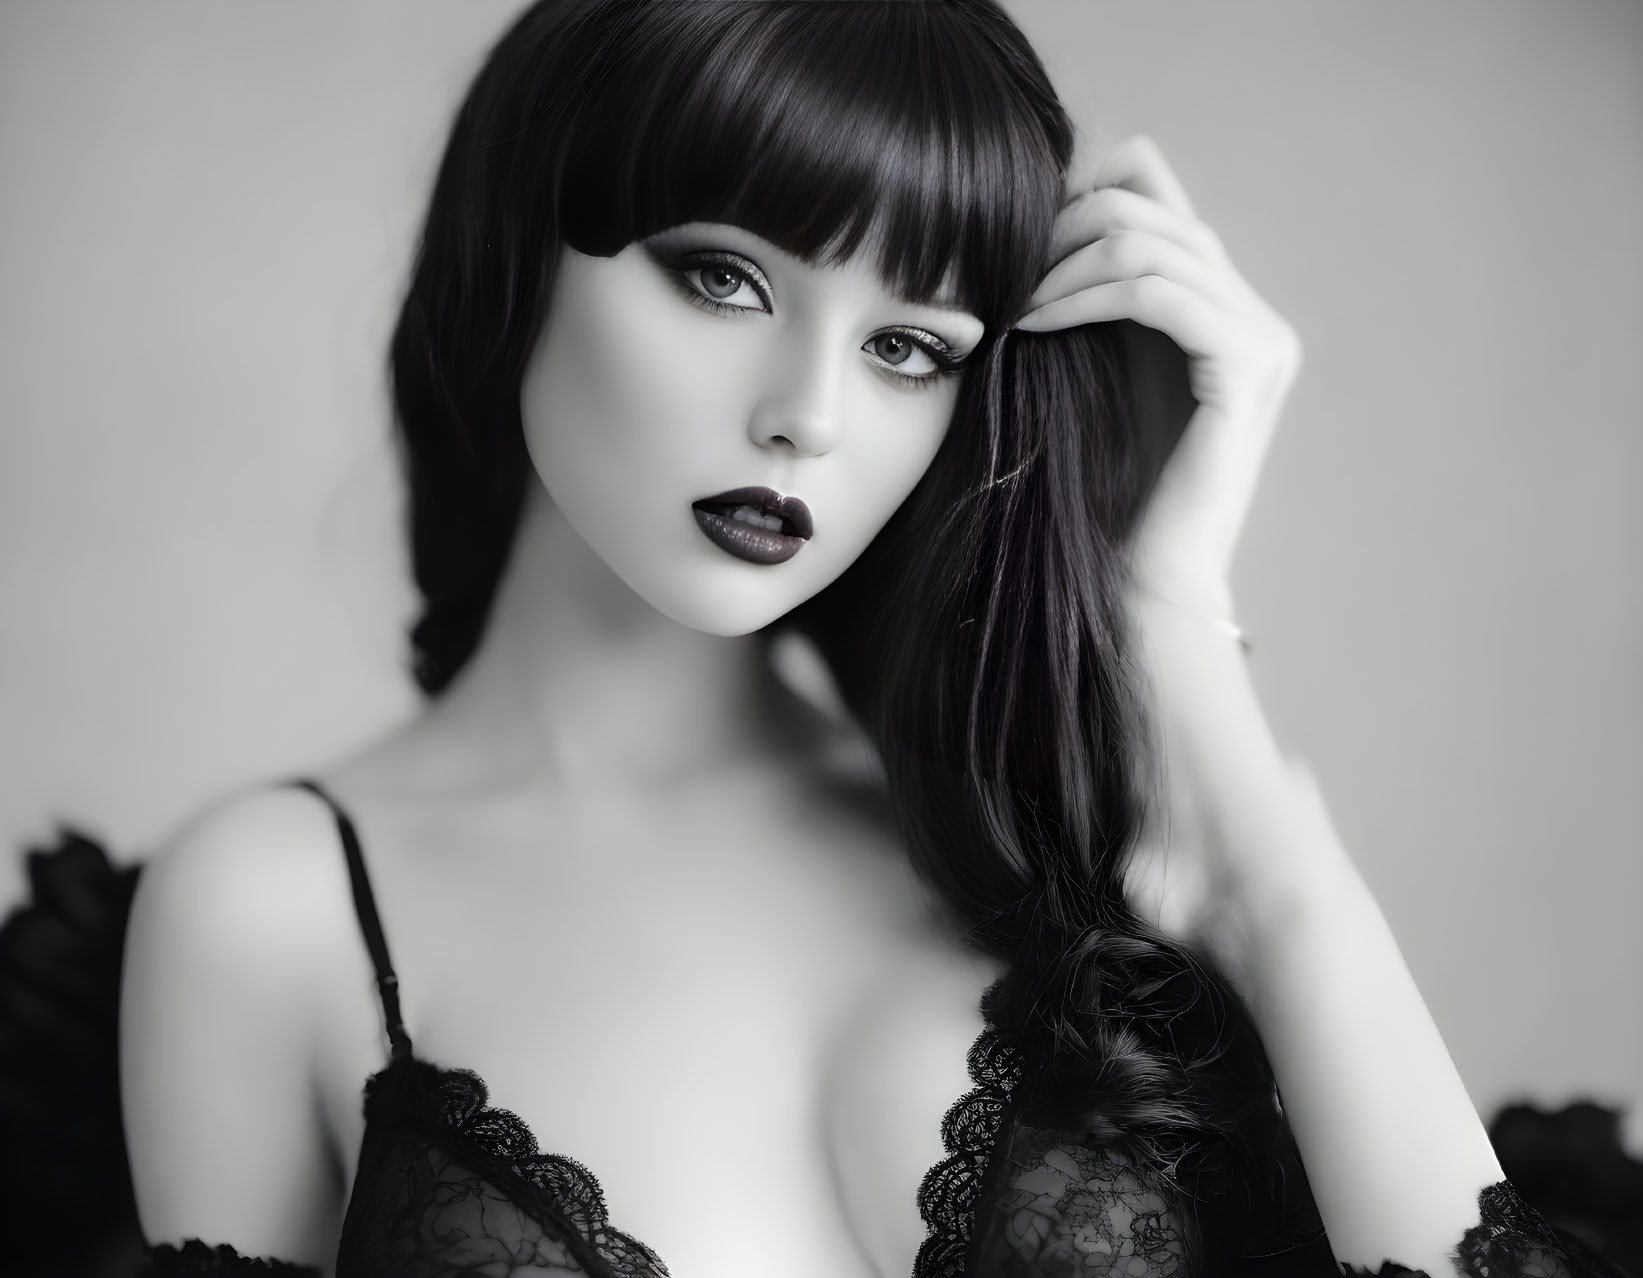 Monochrome portrait of woman with dark lipstick and dramatic eye makeup